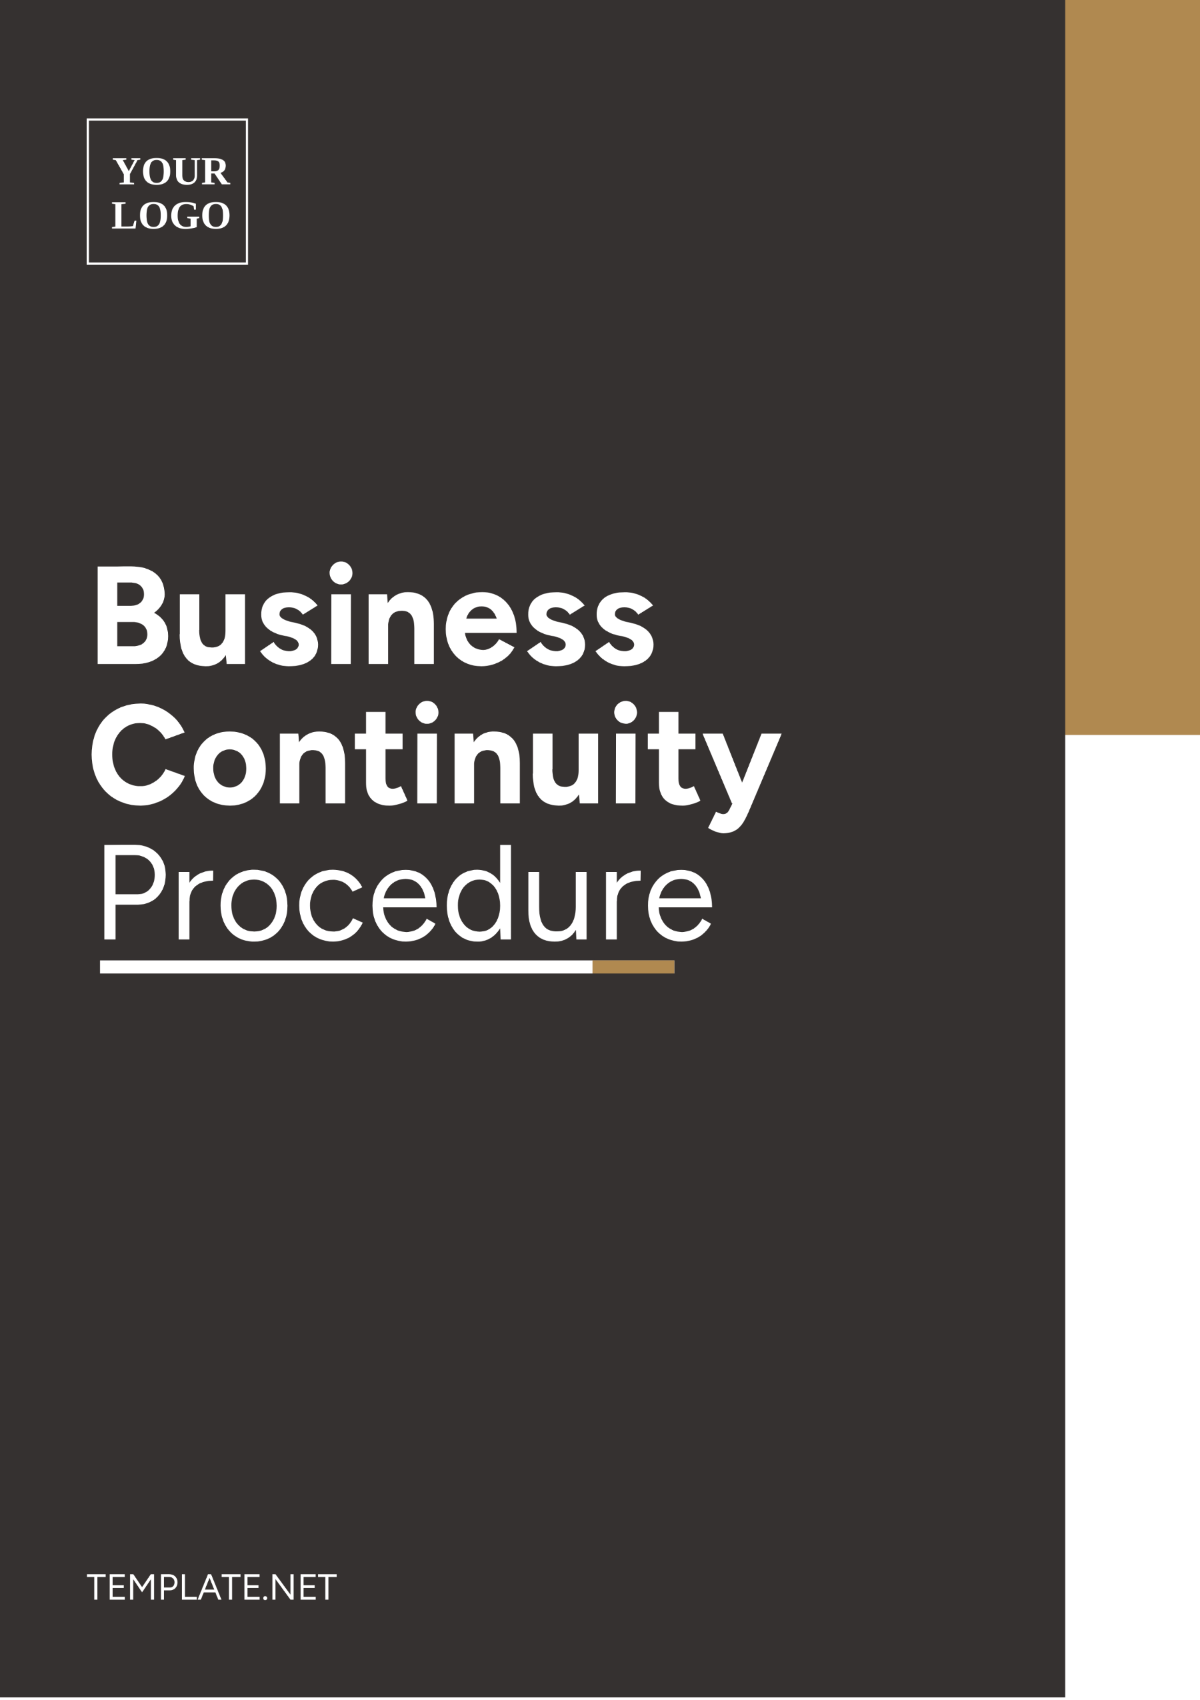 Free Business Continuity Procedure Template